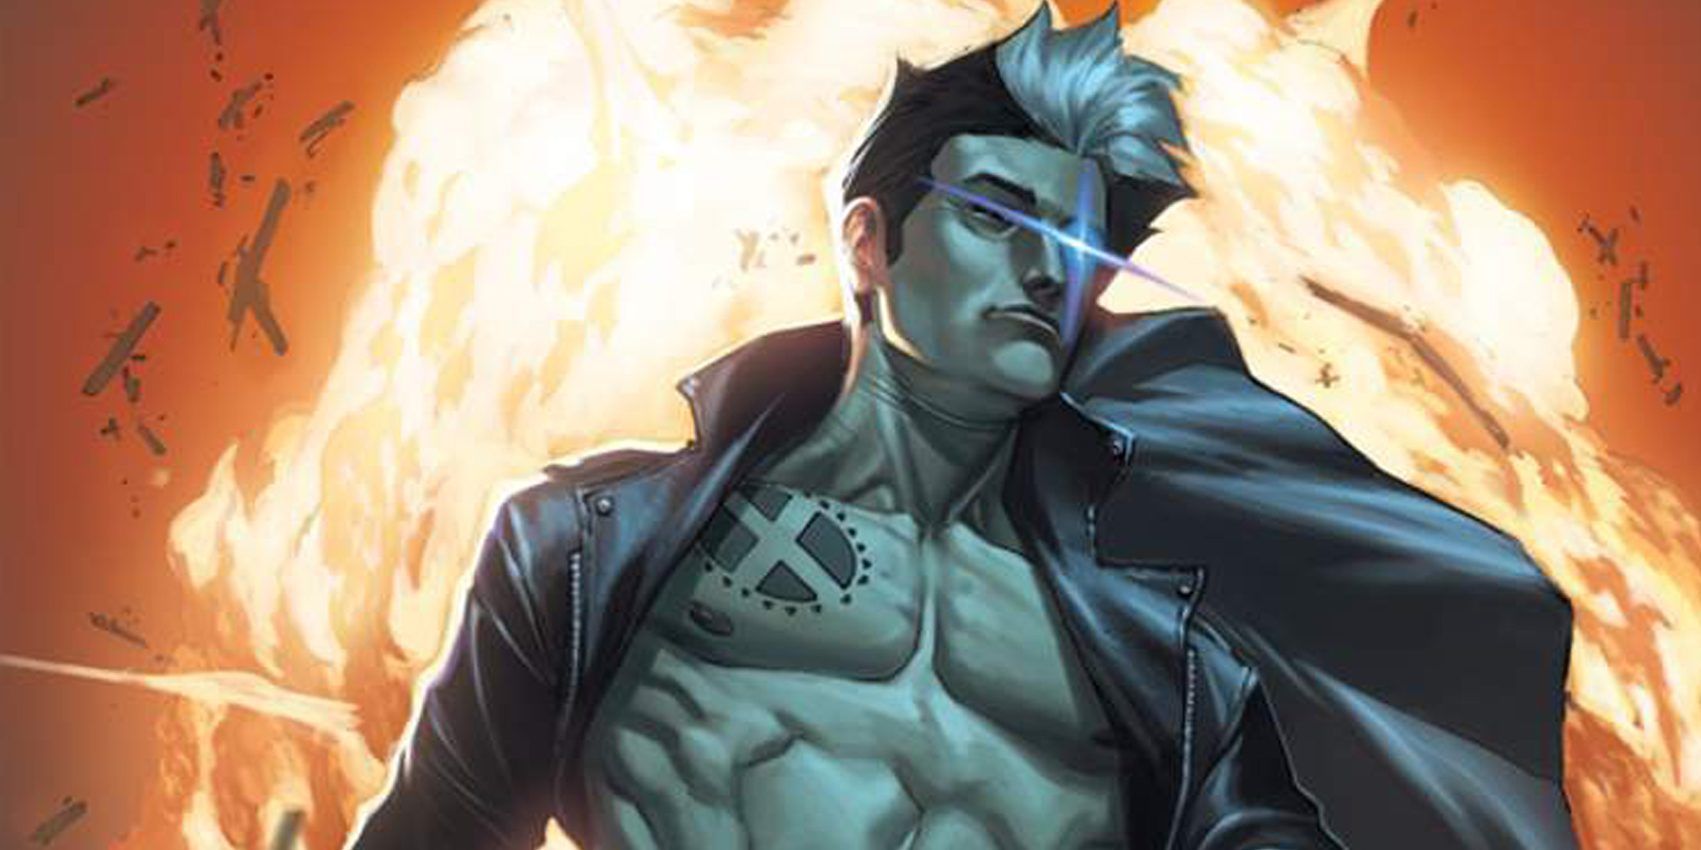 Nate Grey from the X-Men